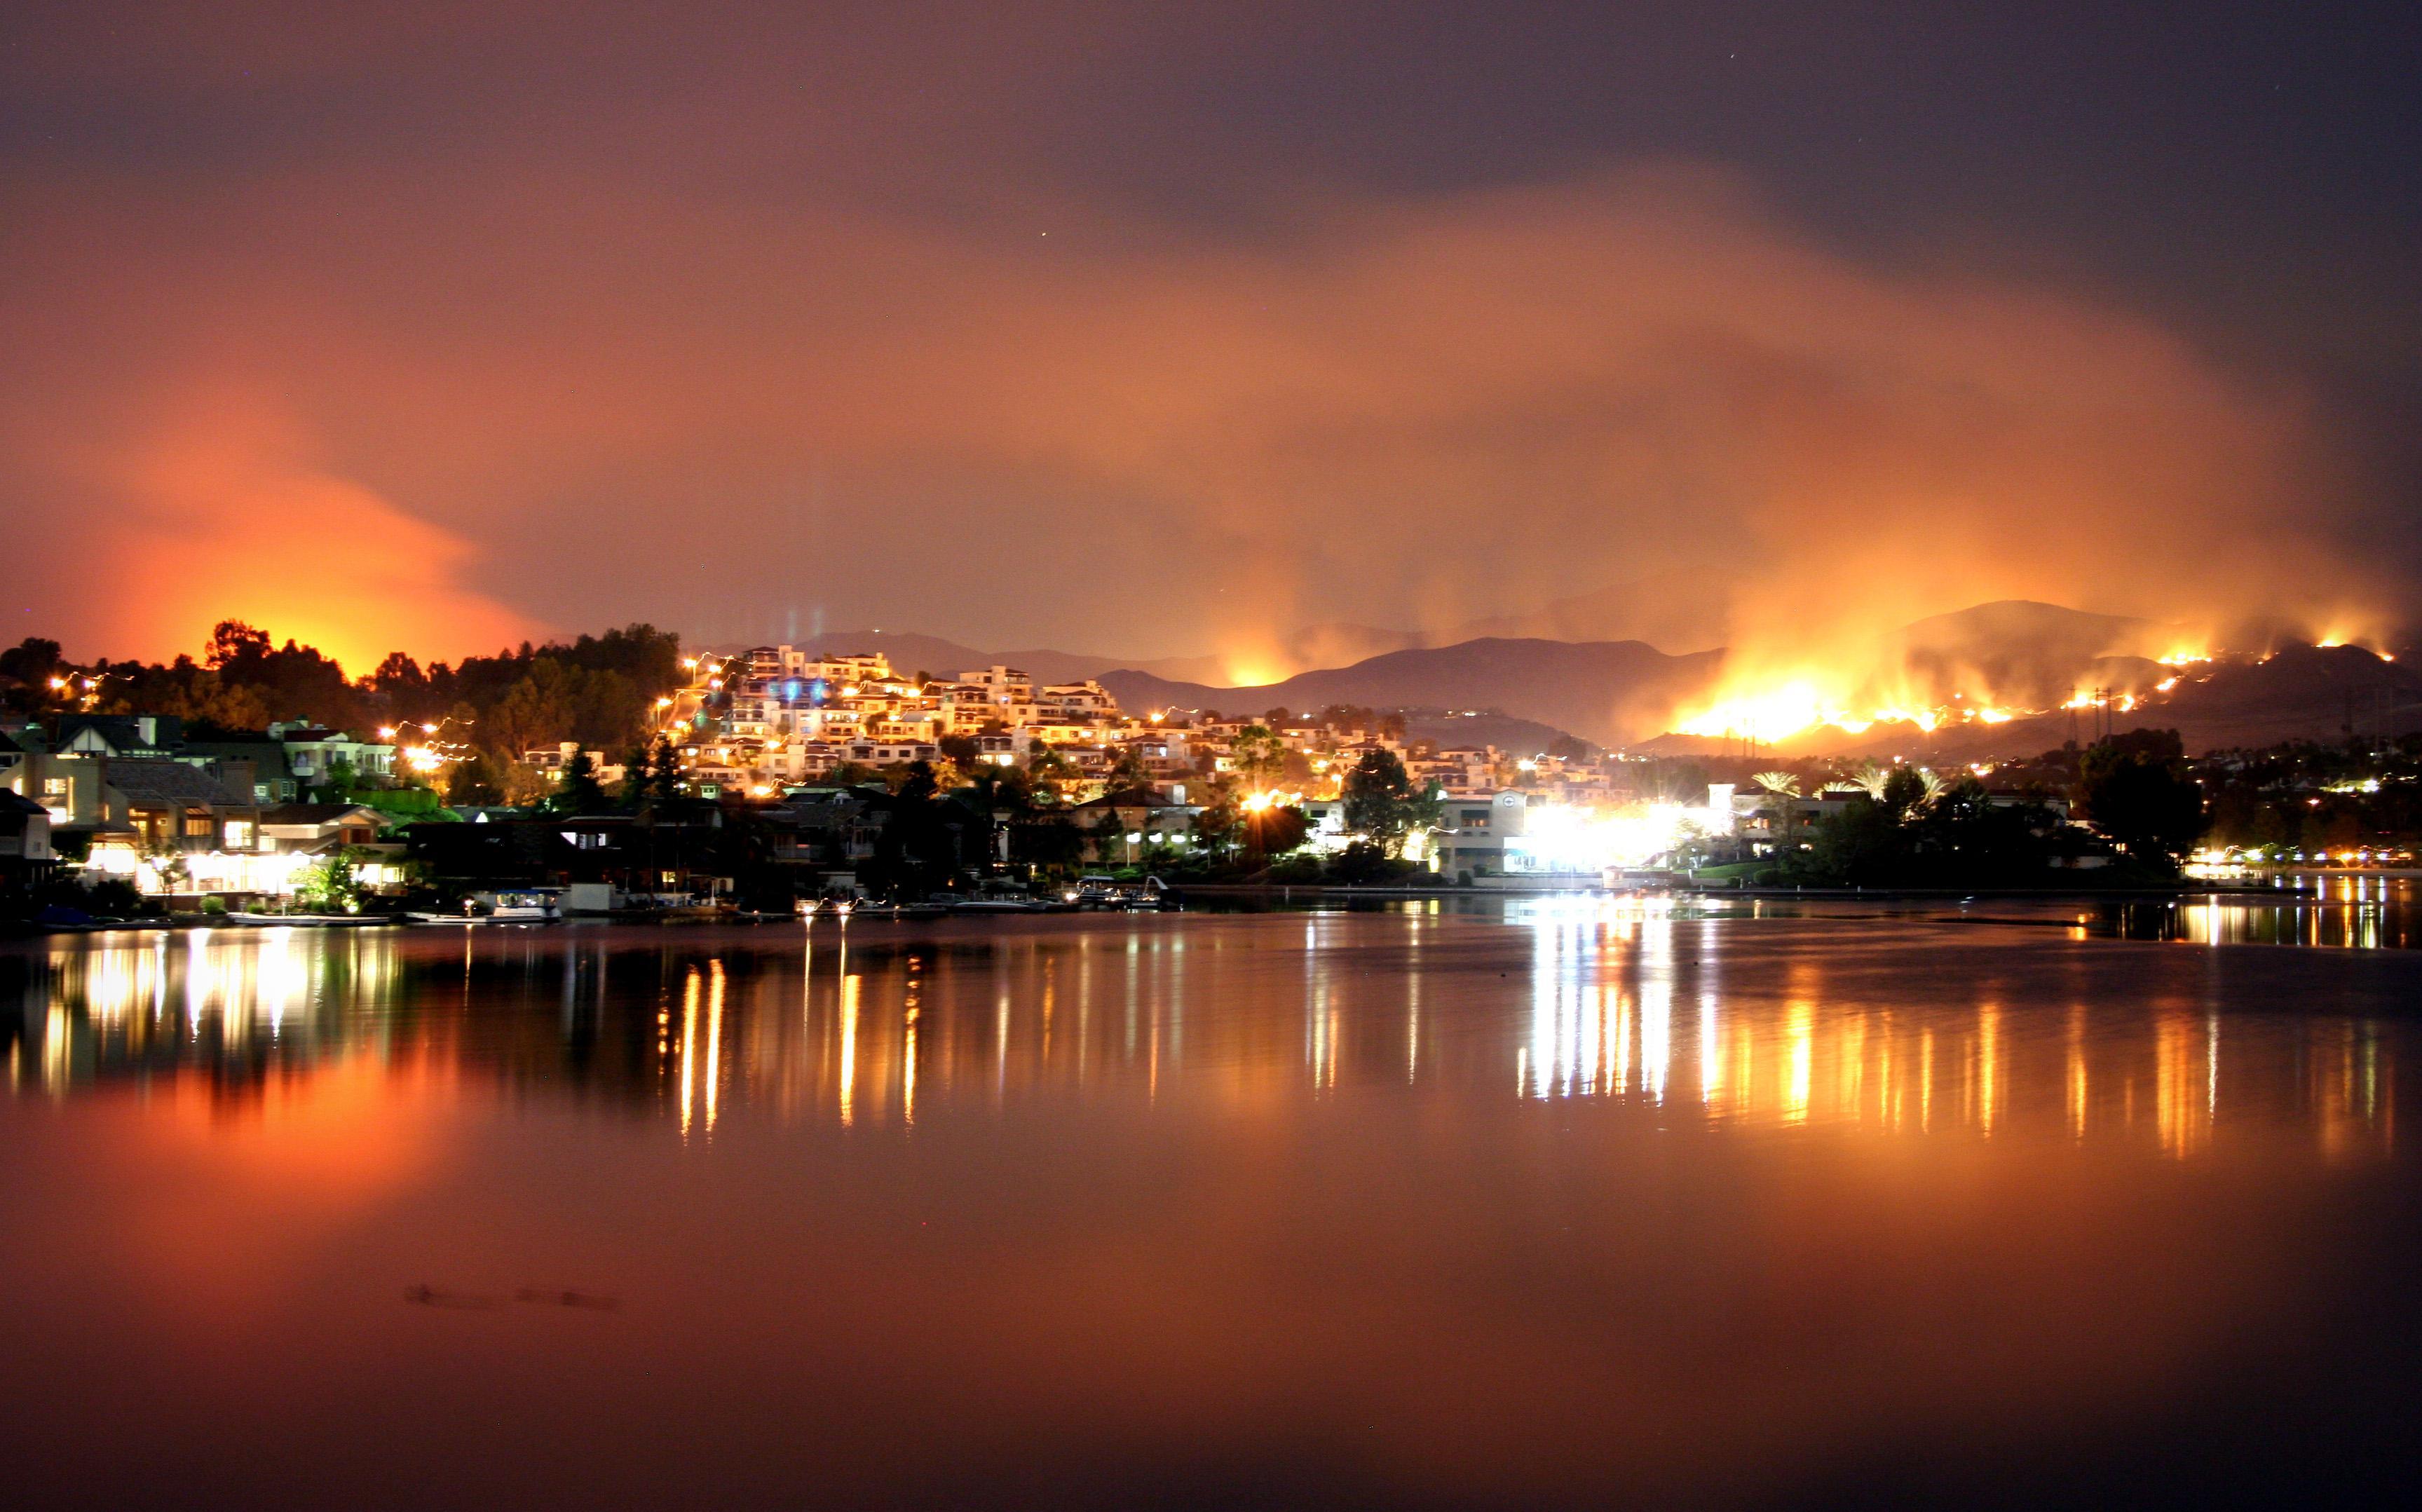 http://upload.wikimedia.org/wikipedia/commons/a/a2/Santiago_fire_seen_from_Mission_Viejo_October_2007.jpg